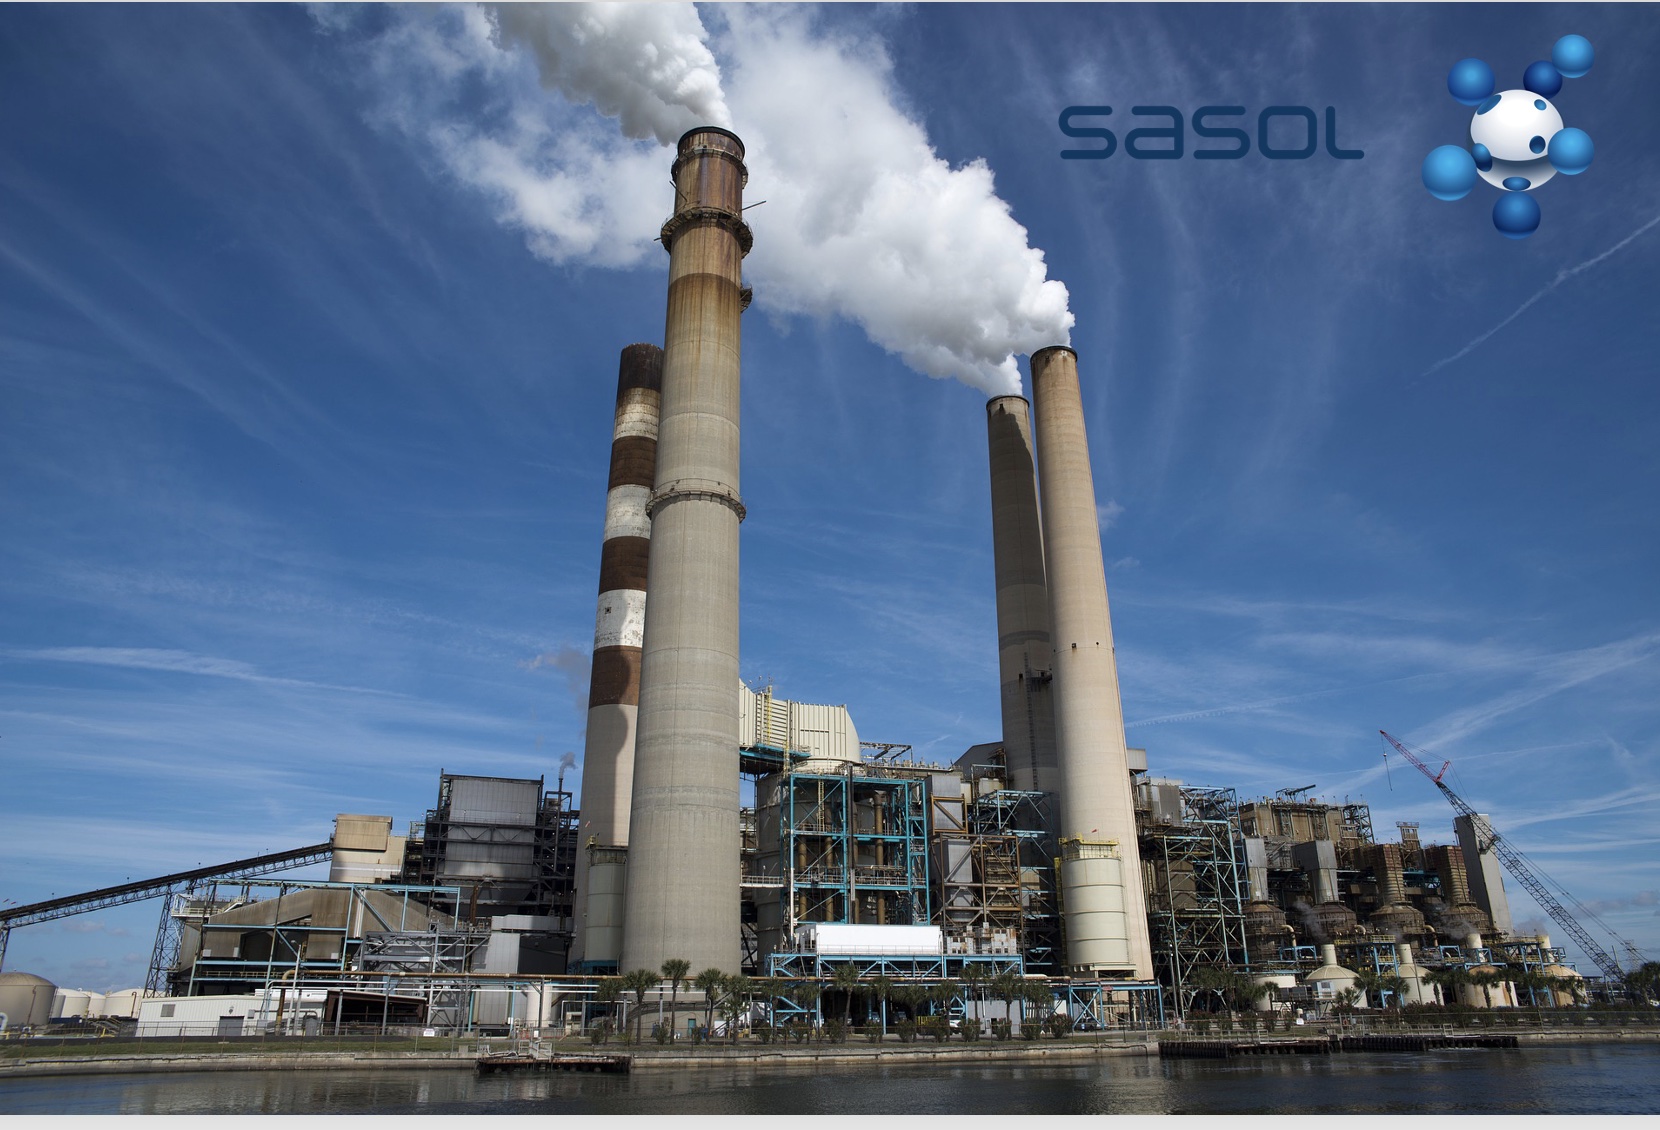 Sasol strikes partnership with state-owned Central Energy Fund to explore gas supply